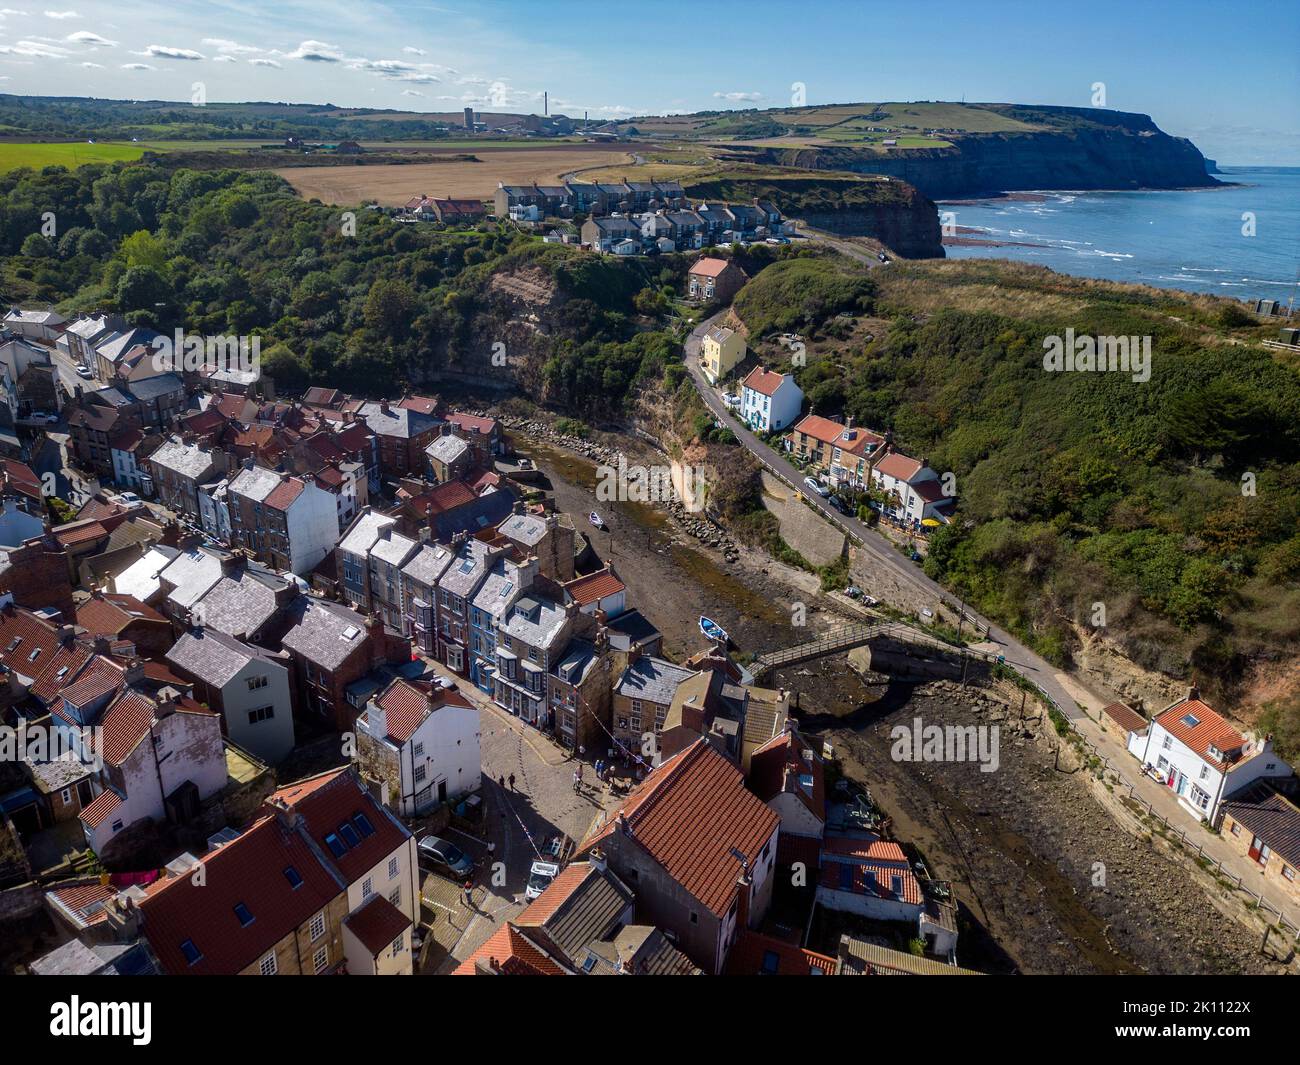 Aerial view of the village of Staithes on the North Yorkshire coast in the United Kingdom. Formerly one of the many fishing centers in England, Staith Stock Photo